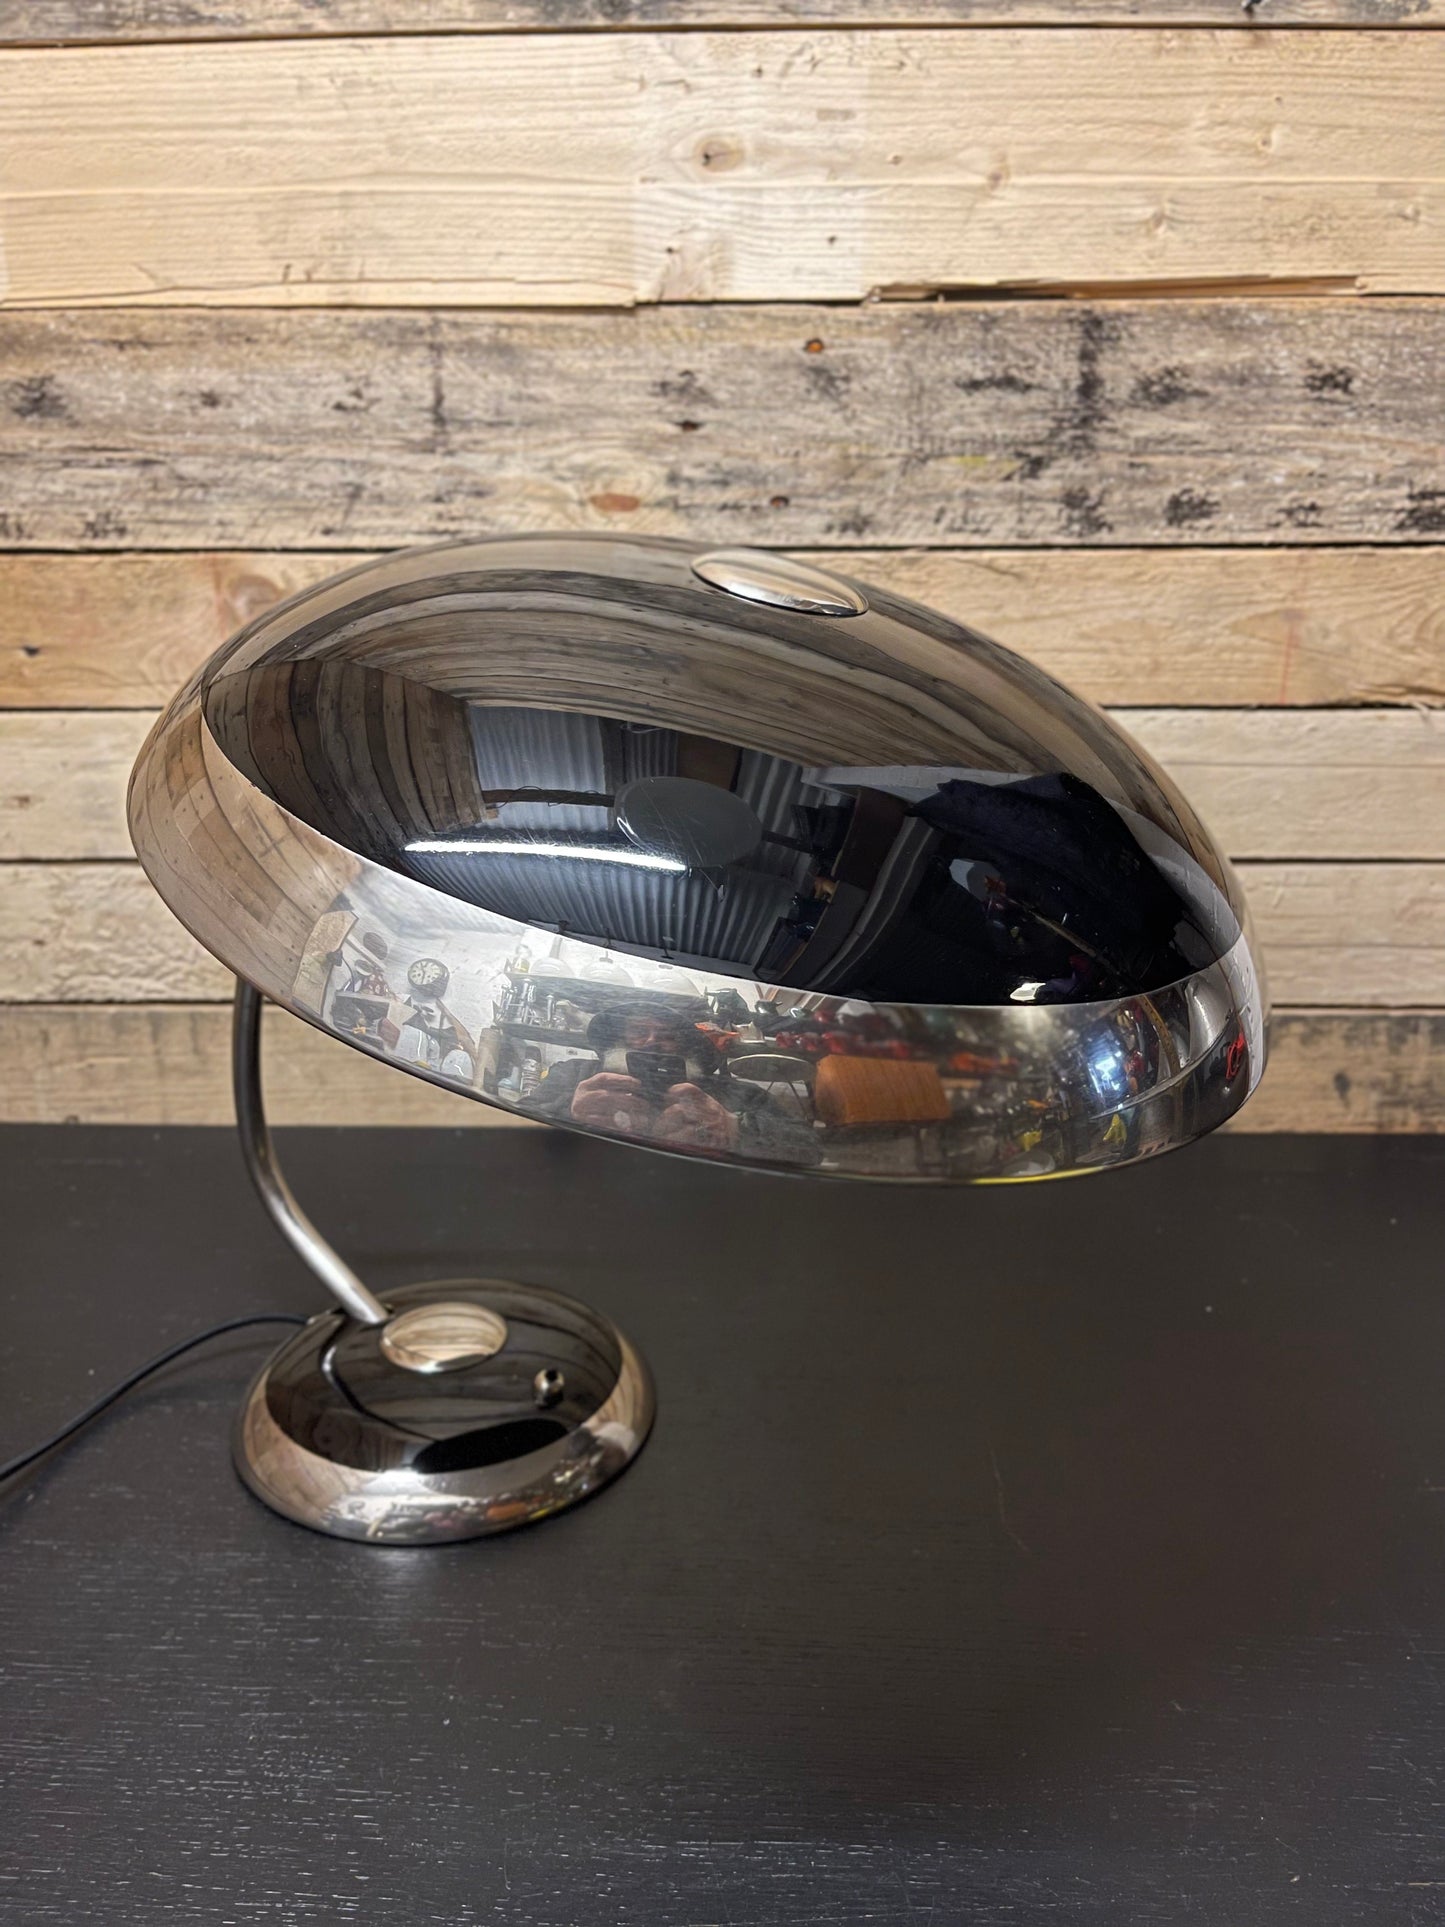 Large 1950s Modernist Table Lamp By Helo Leuchten